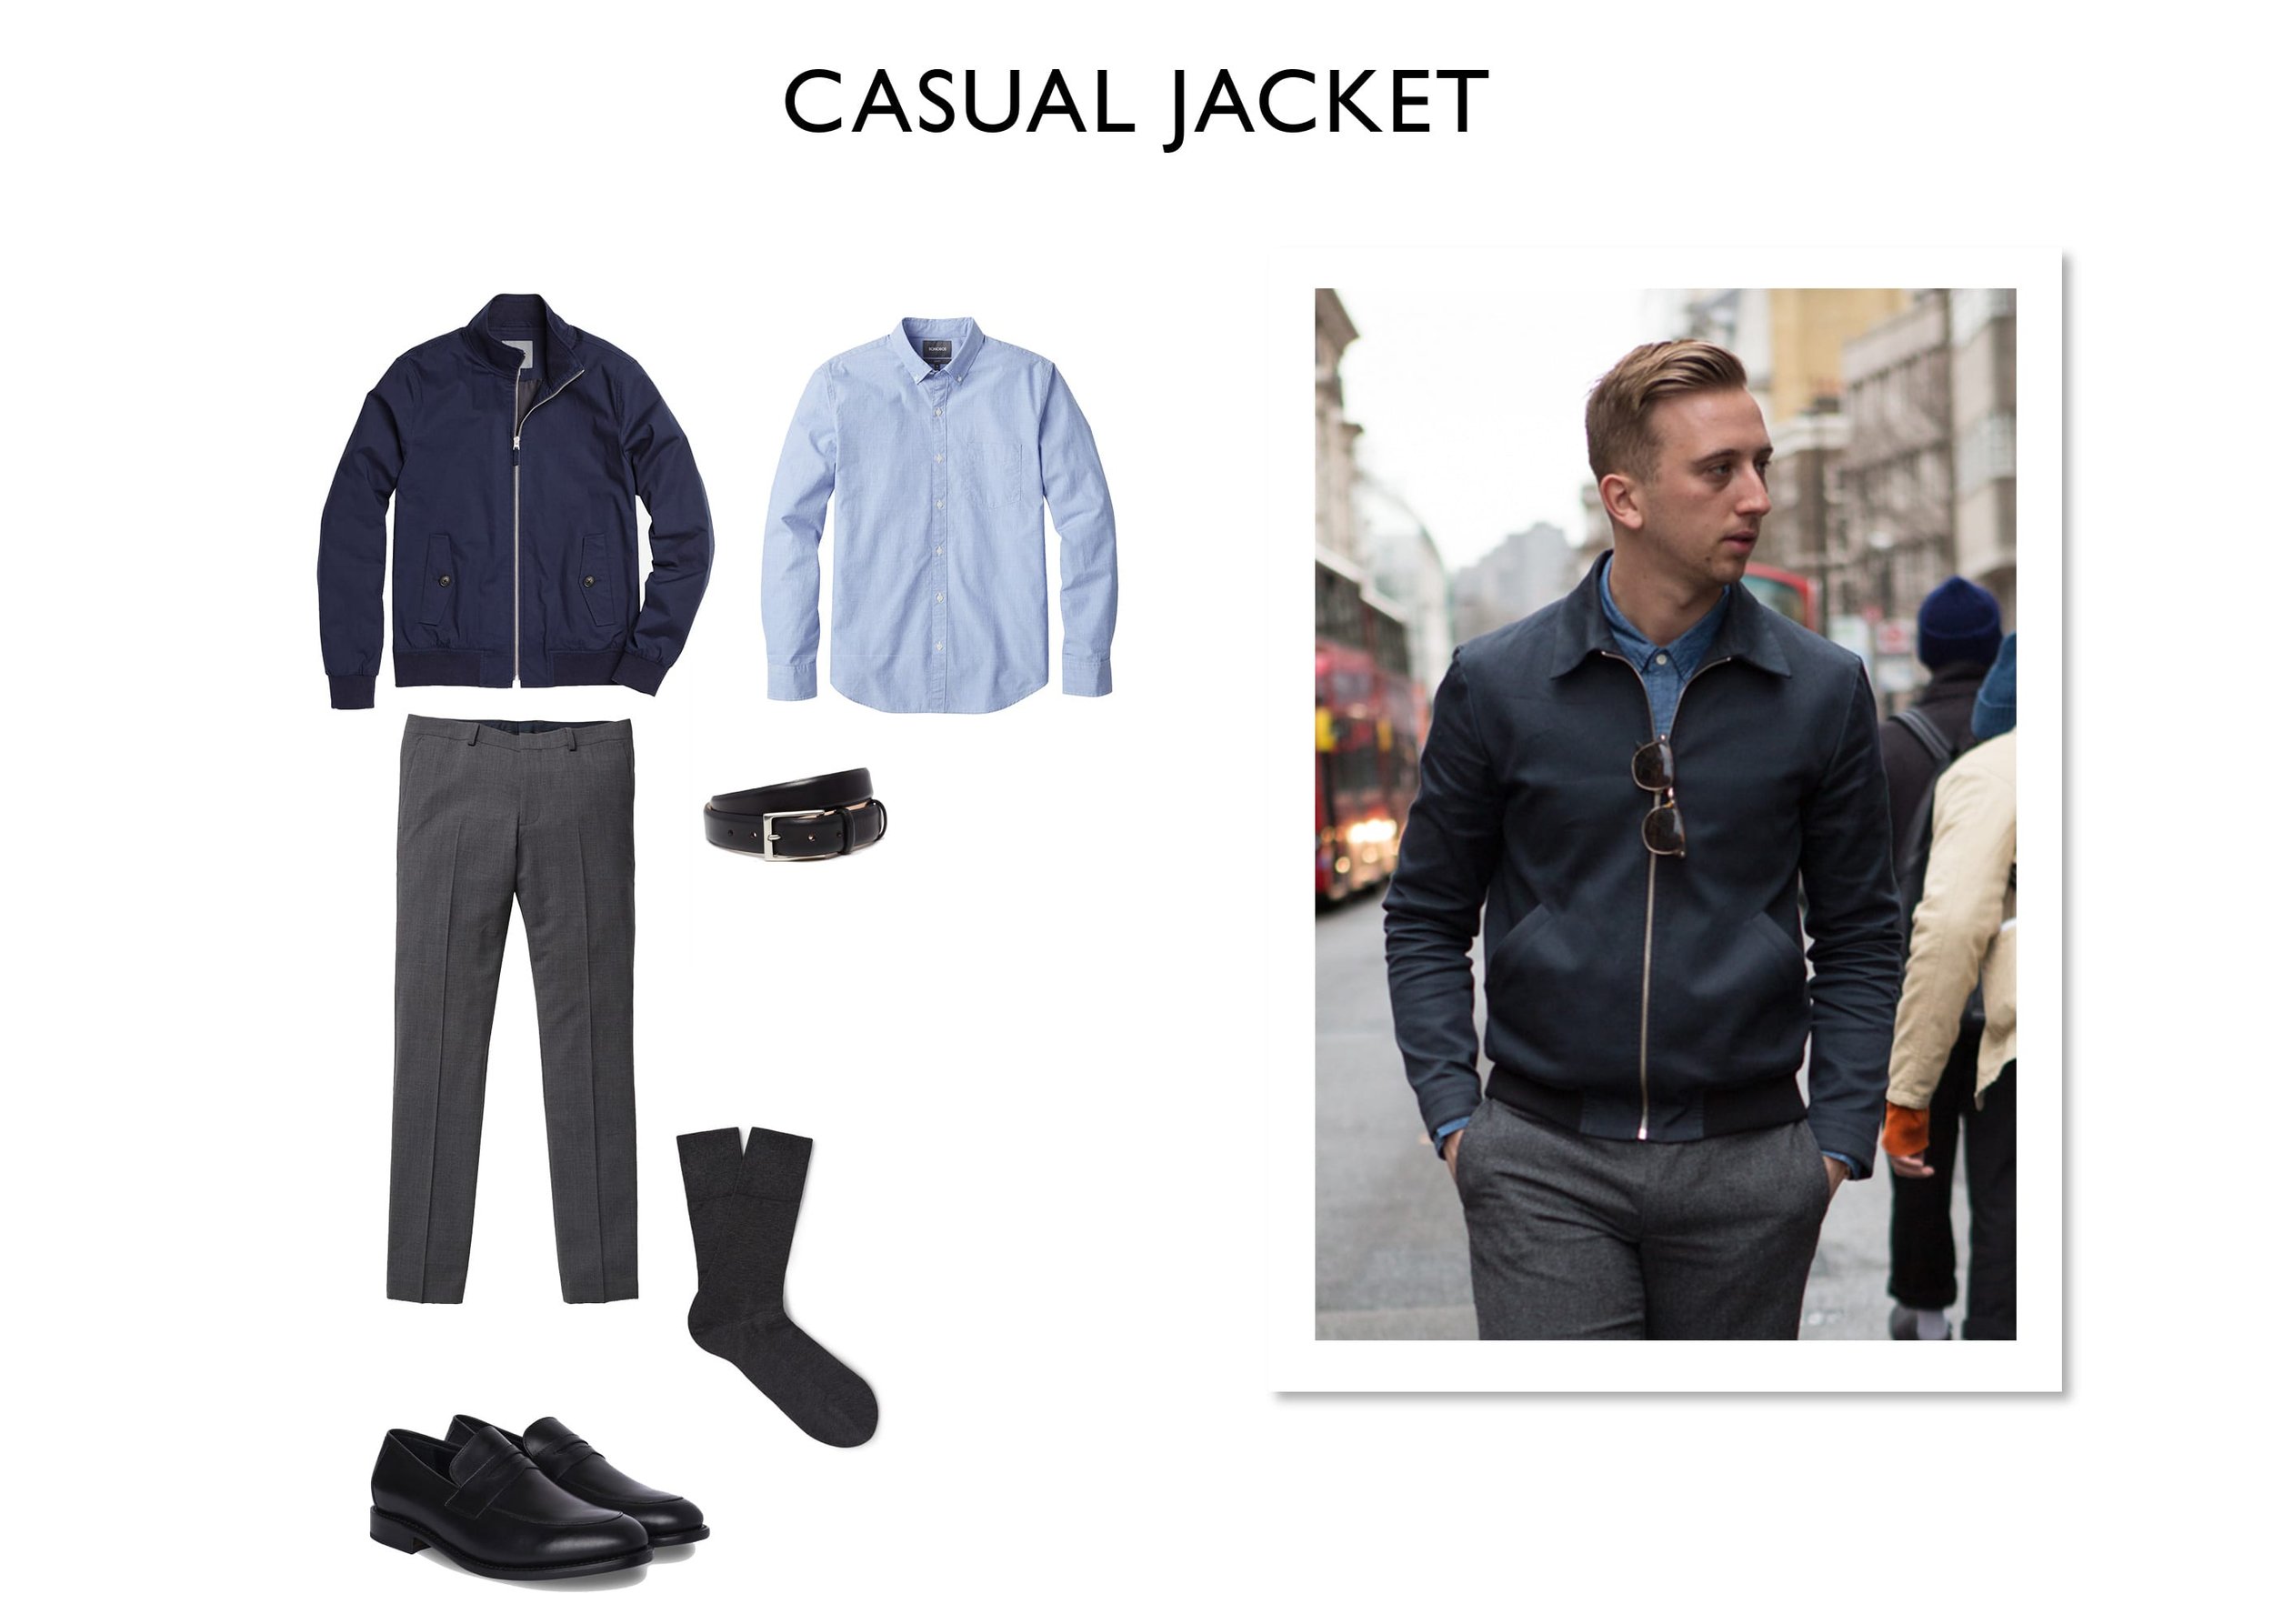 The Ultimate Guide to Business Casual Style for Men — The